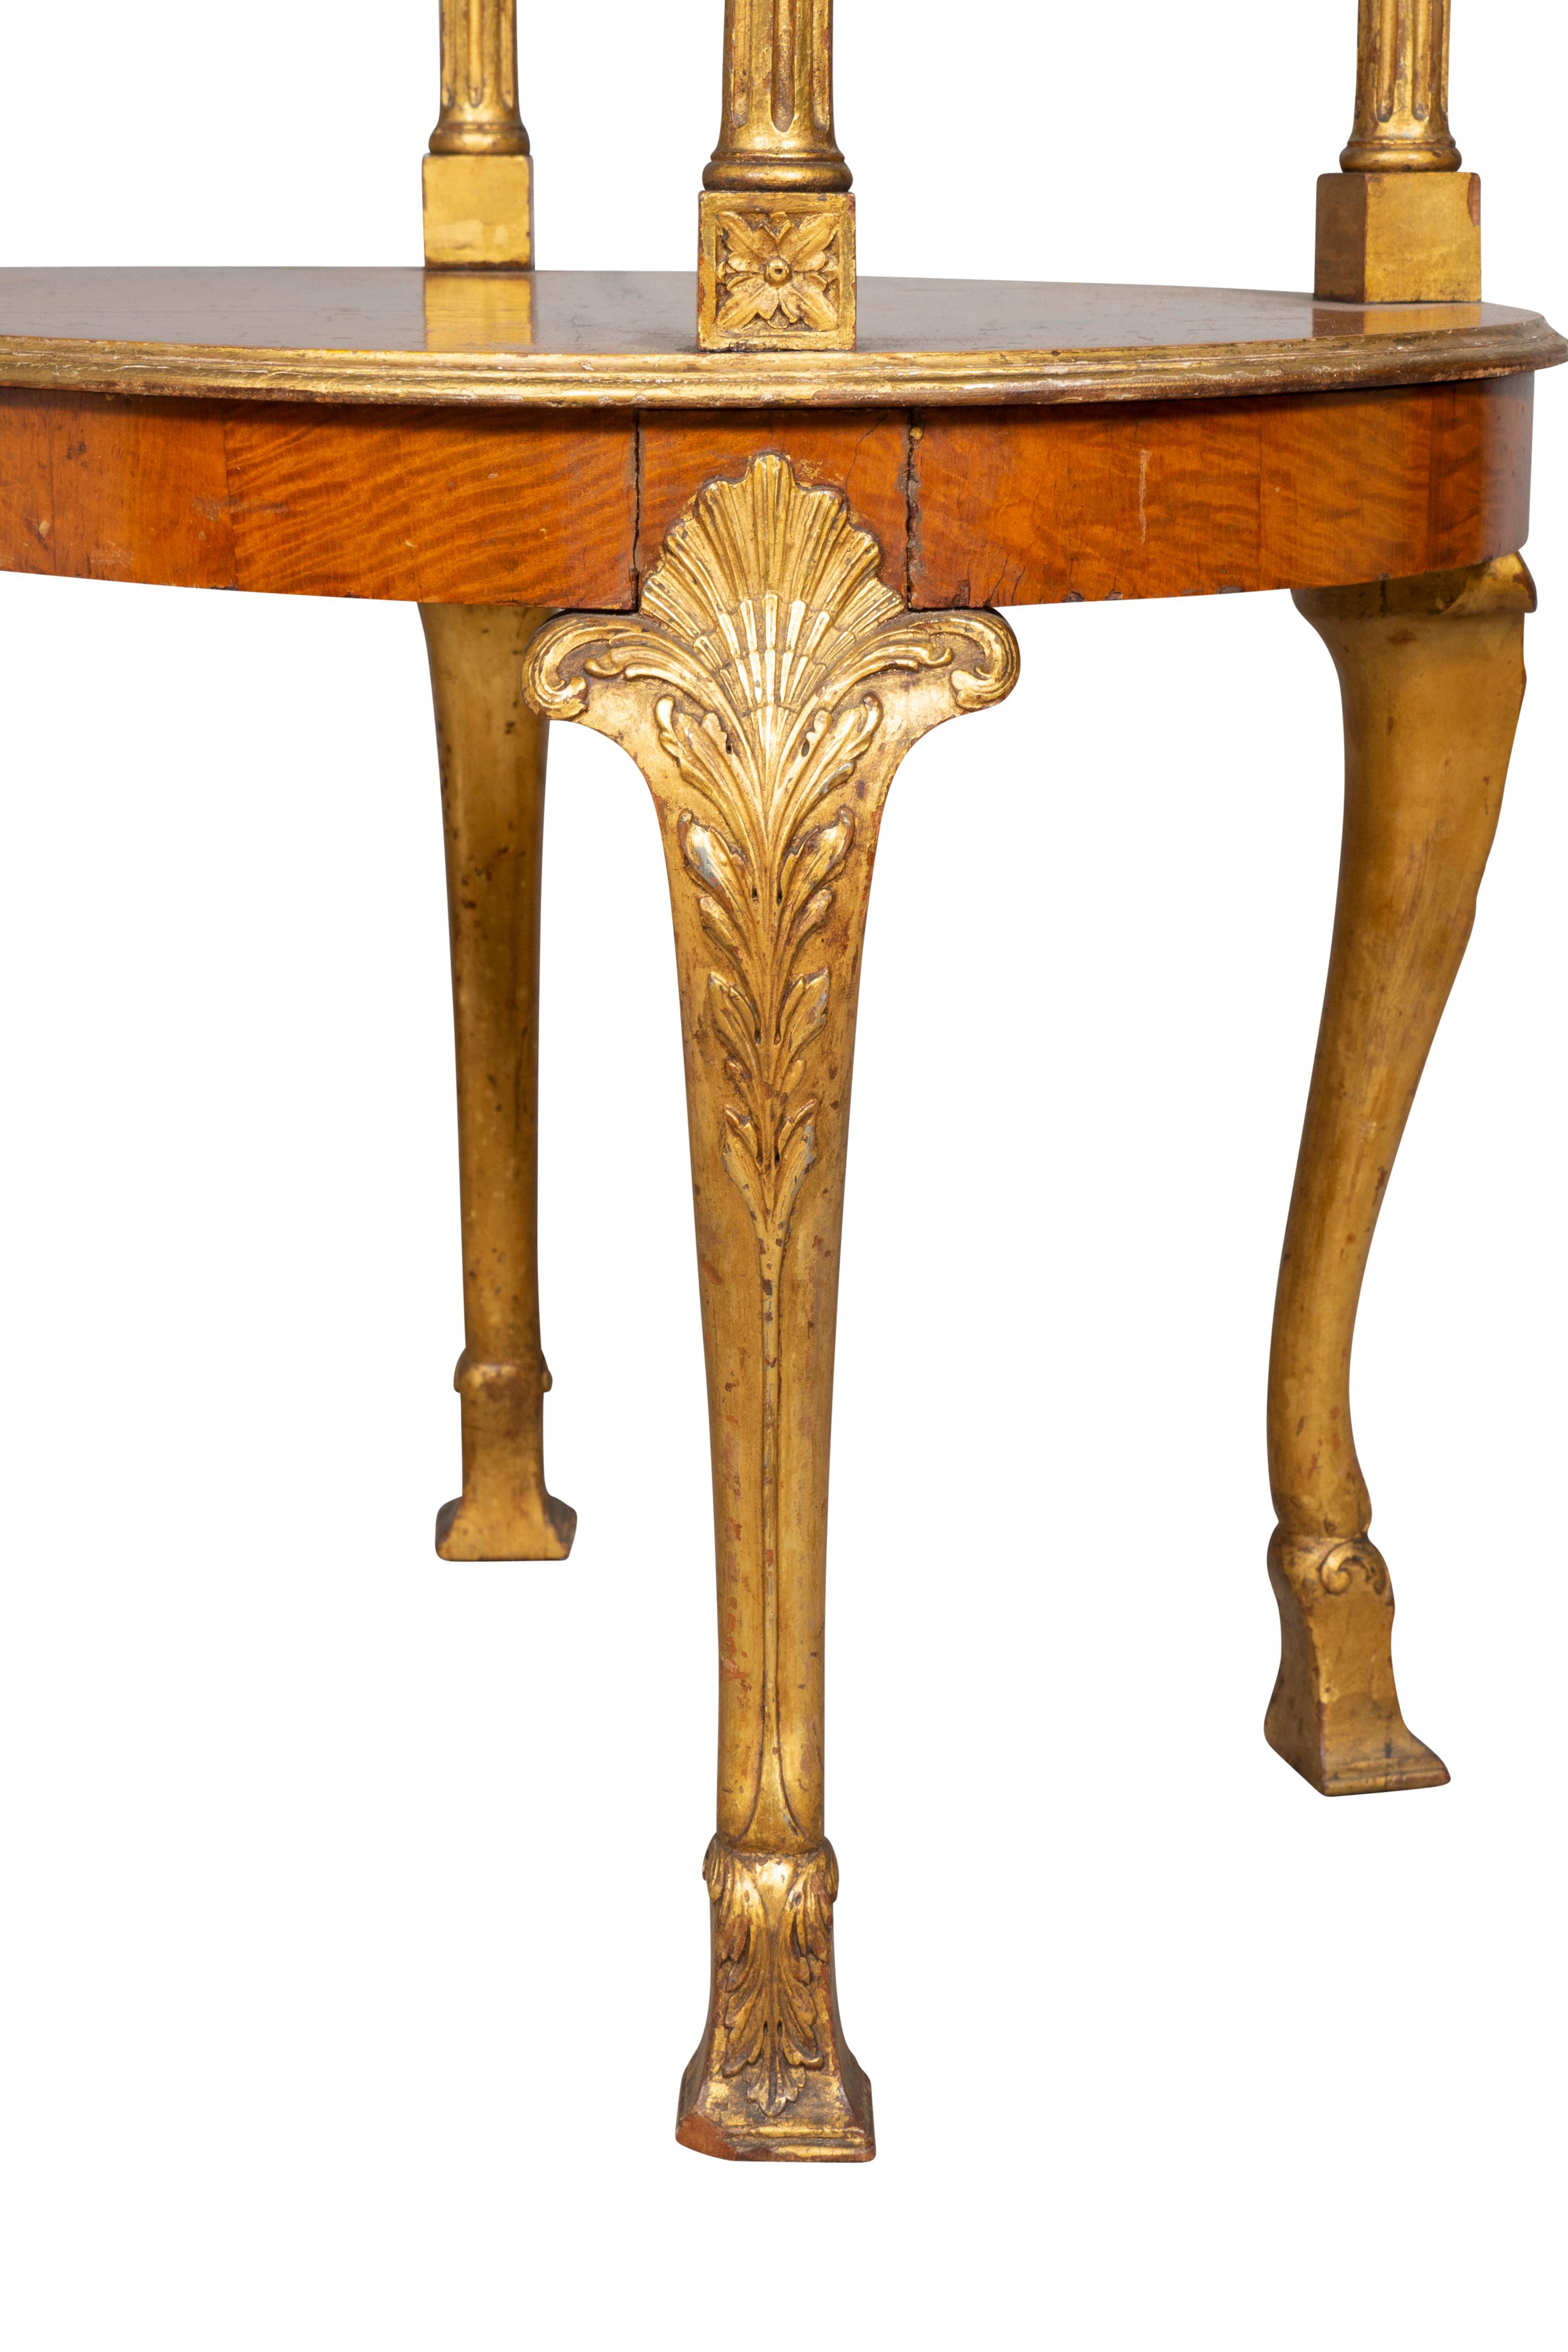 Edwardian Satinwood and Gilded Table For Sale 1